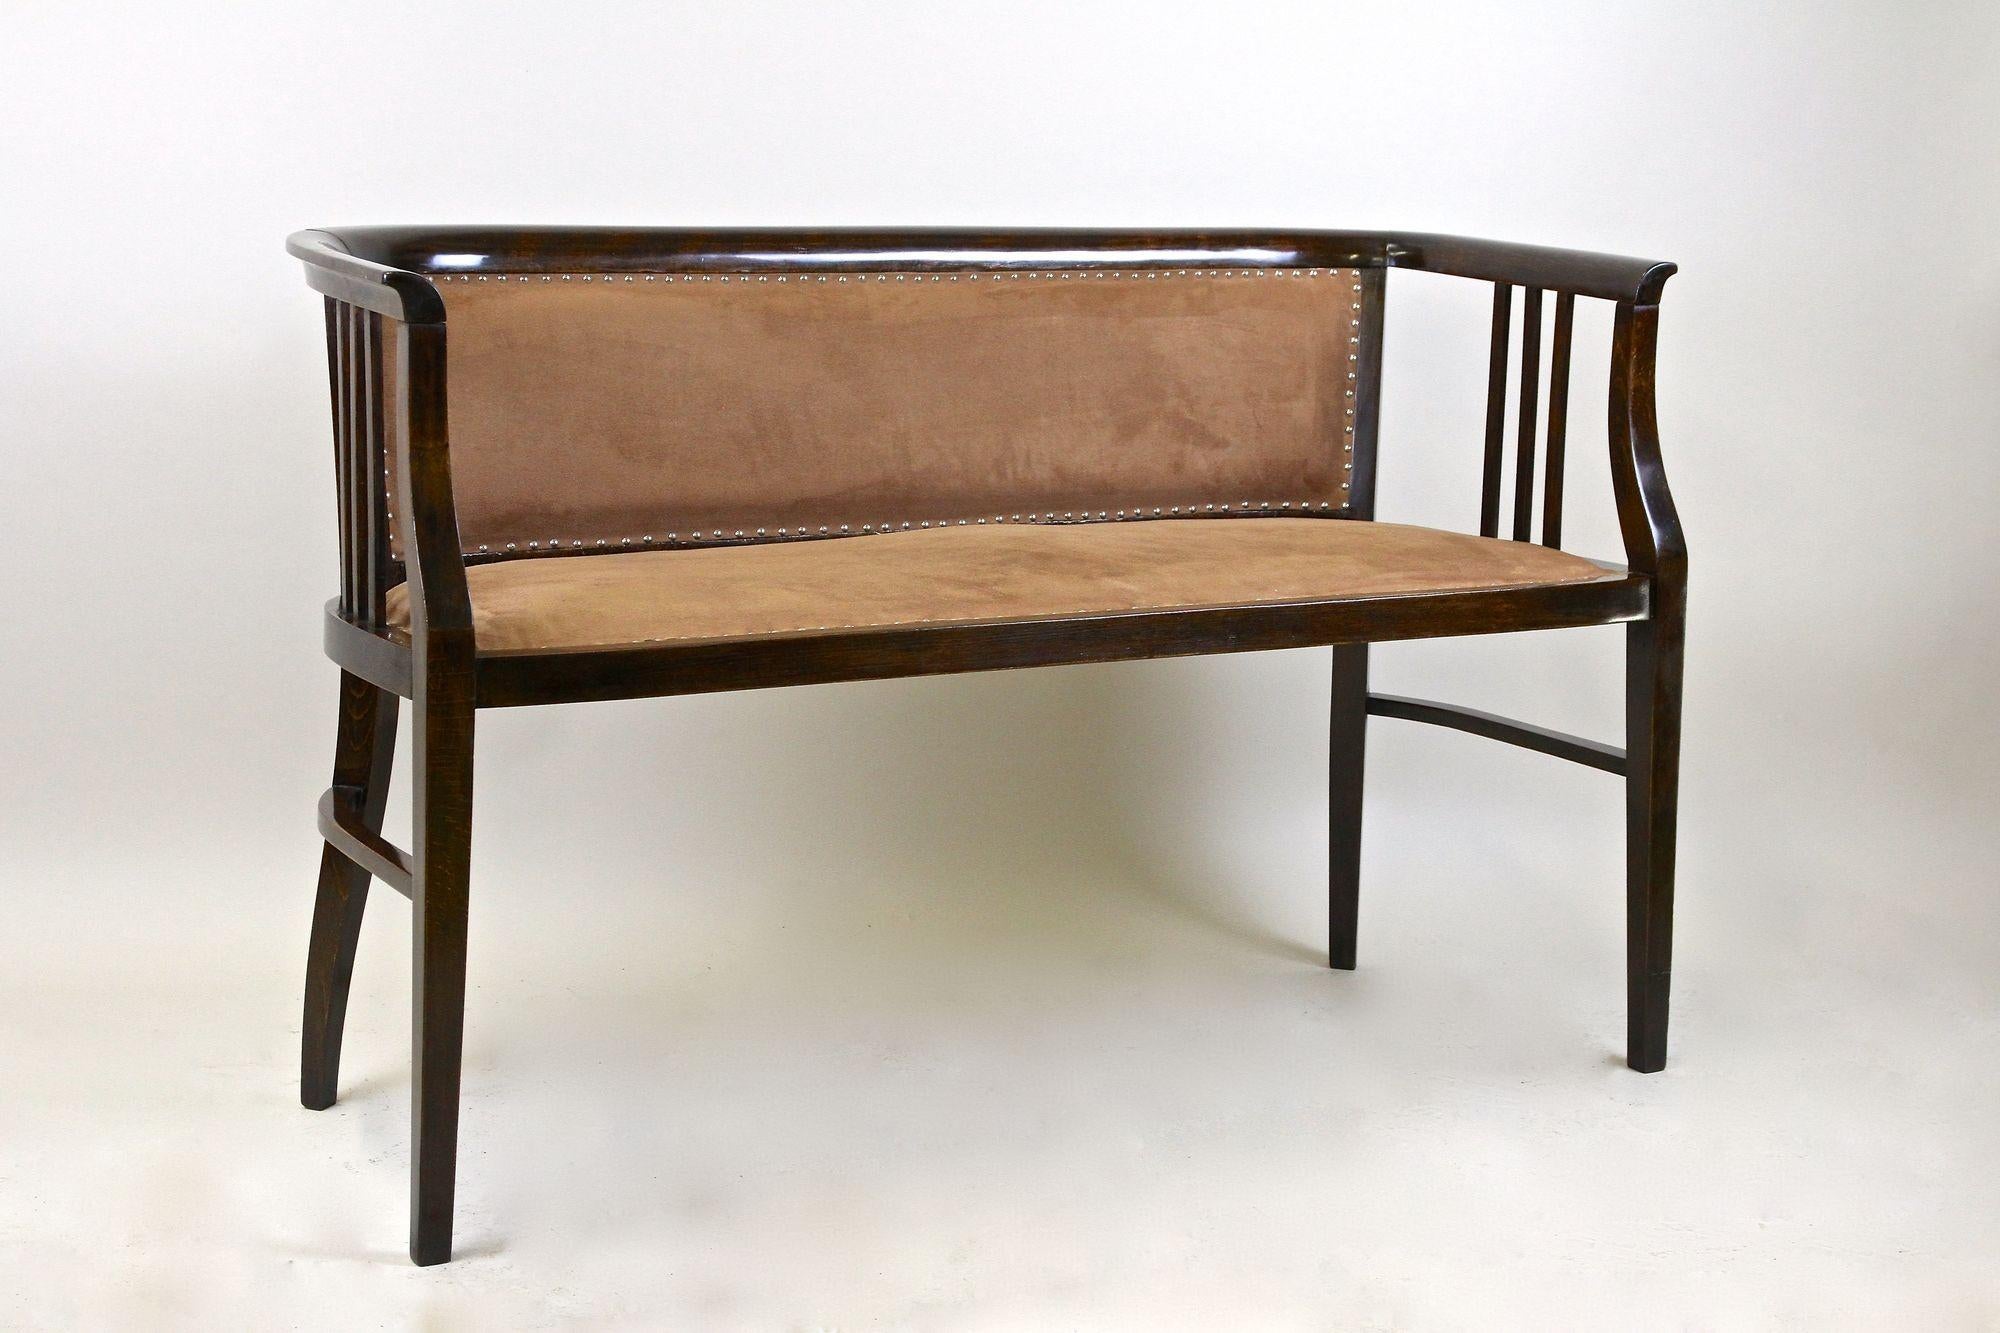 20th Century Art Nouveau Bentwood Bench, Newly Upholstered, Austria, circa 1910 For Sale 1